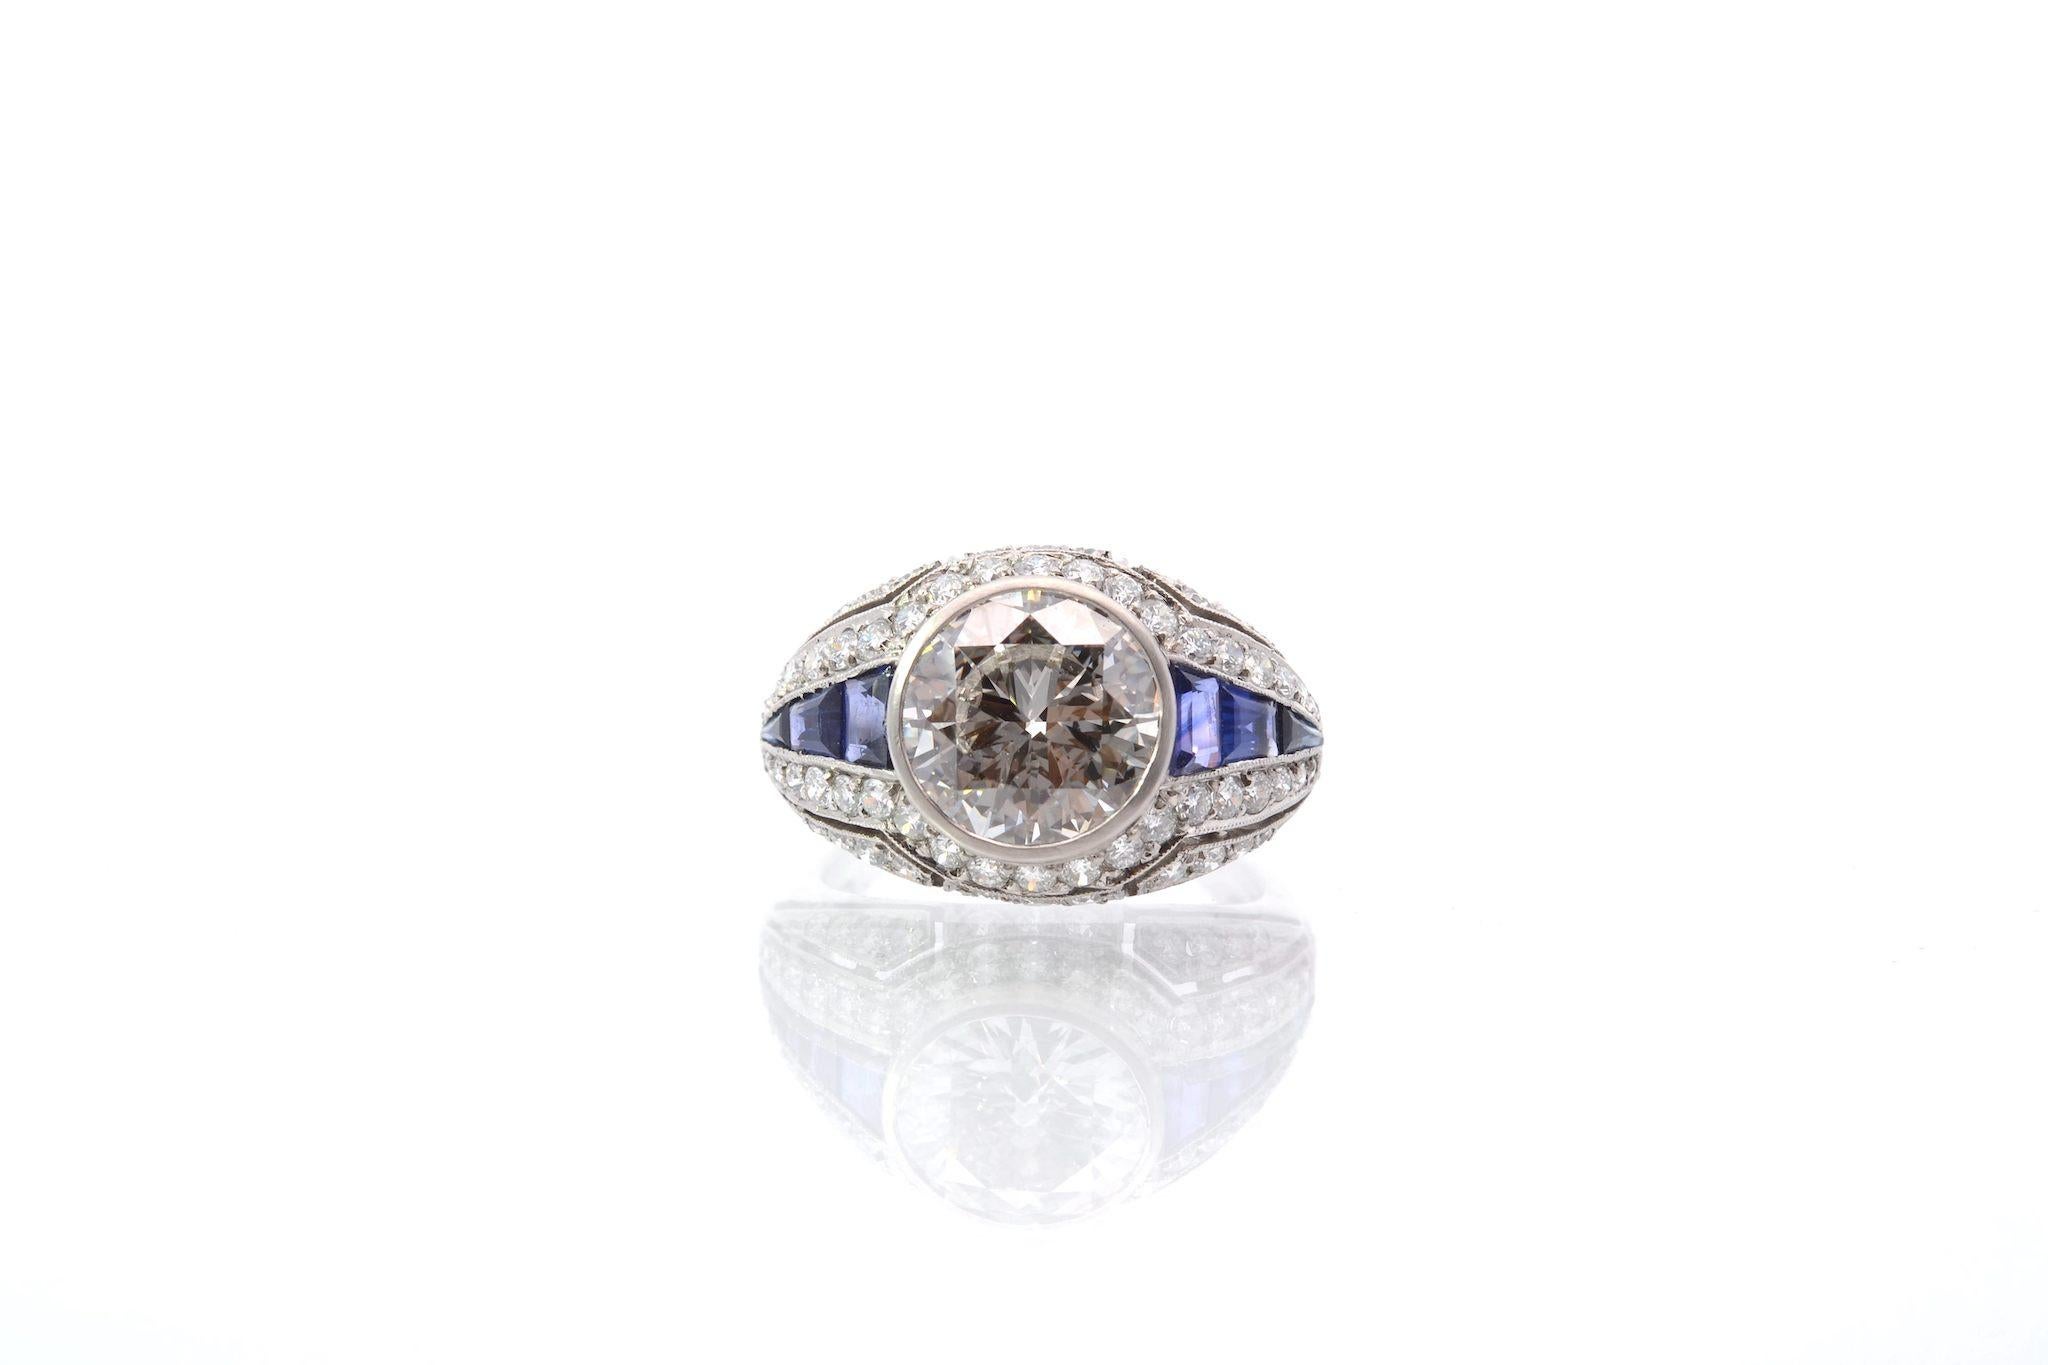 Stones: 1 brilliant-cut diamond of 4.03 cts H VVS2 HRD certificate, 6 sapphires: 1.50 cts, 62 diamonds: 1.40 cts
Material: Platinum
Weight: 8.9g
Period: Recent art deco style (handmade)
Size: 56 (free sizing)
Certificate
Ref. : 25319 25088